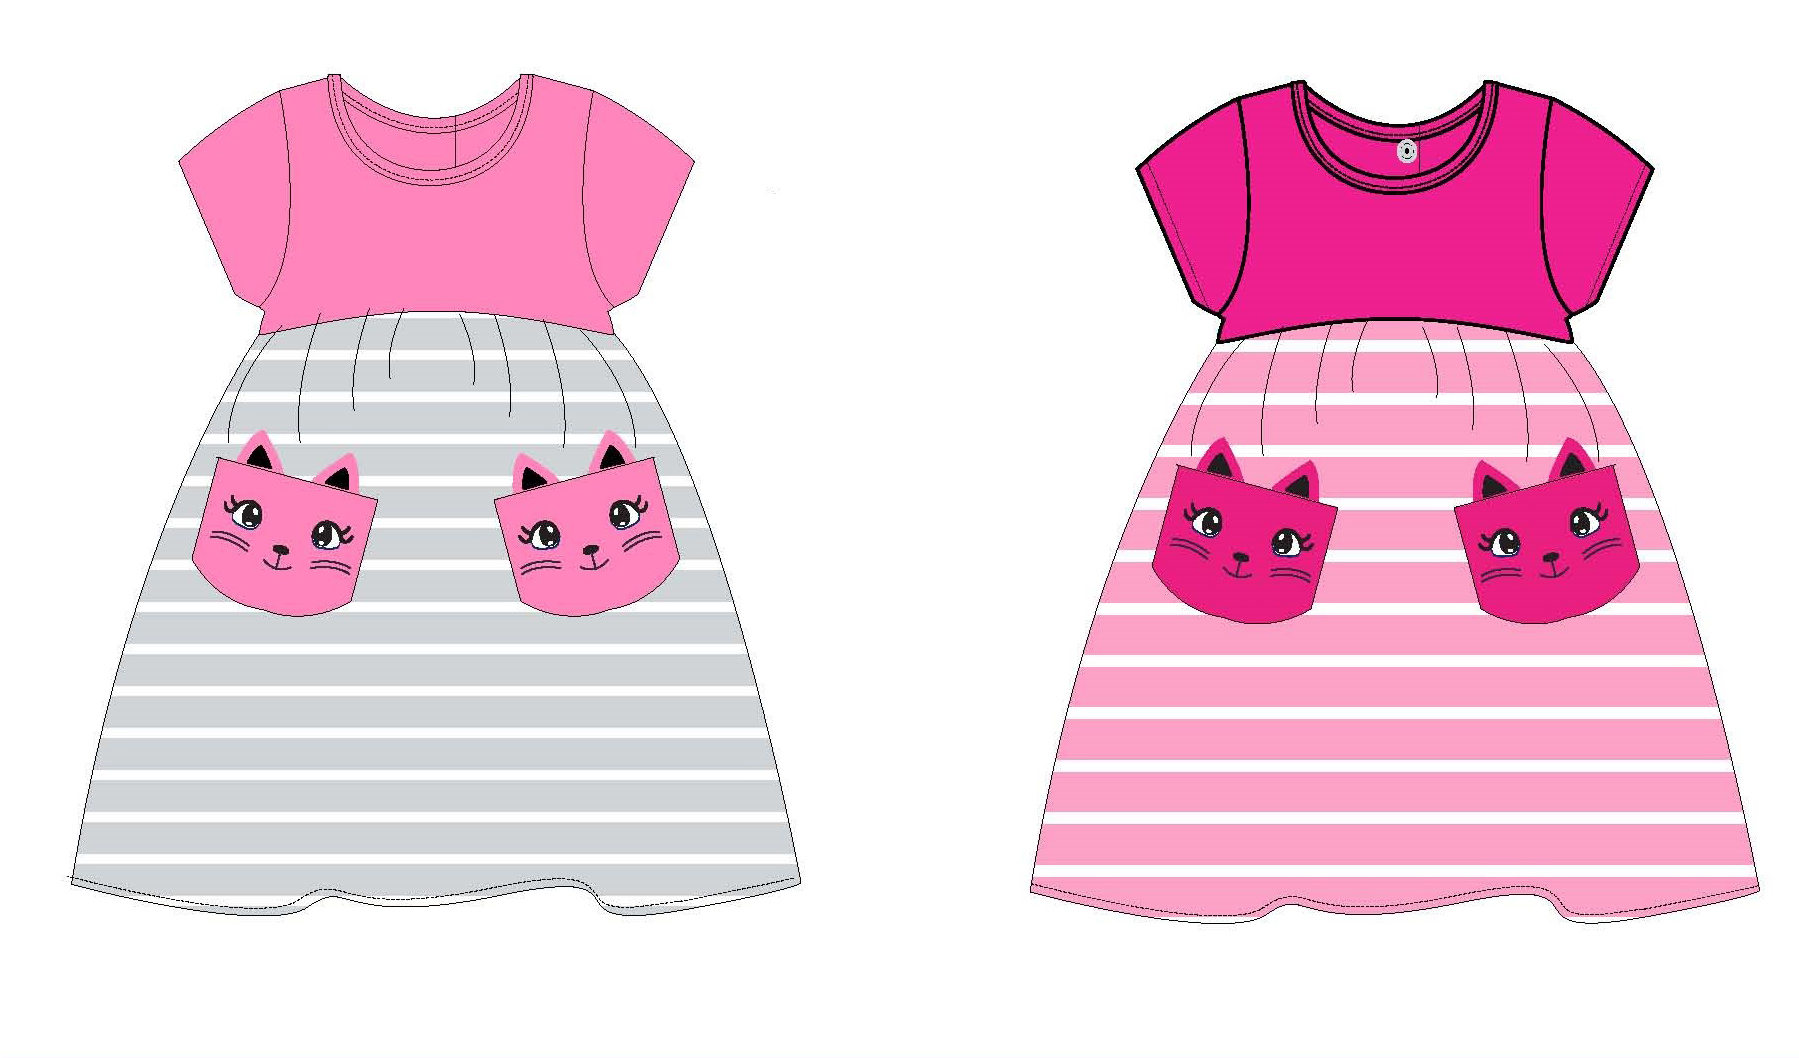 Infant Girl's Knit Striped Dresses w/ Embroidered Cat Printed Pockets - Sizes 12M-24M